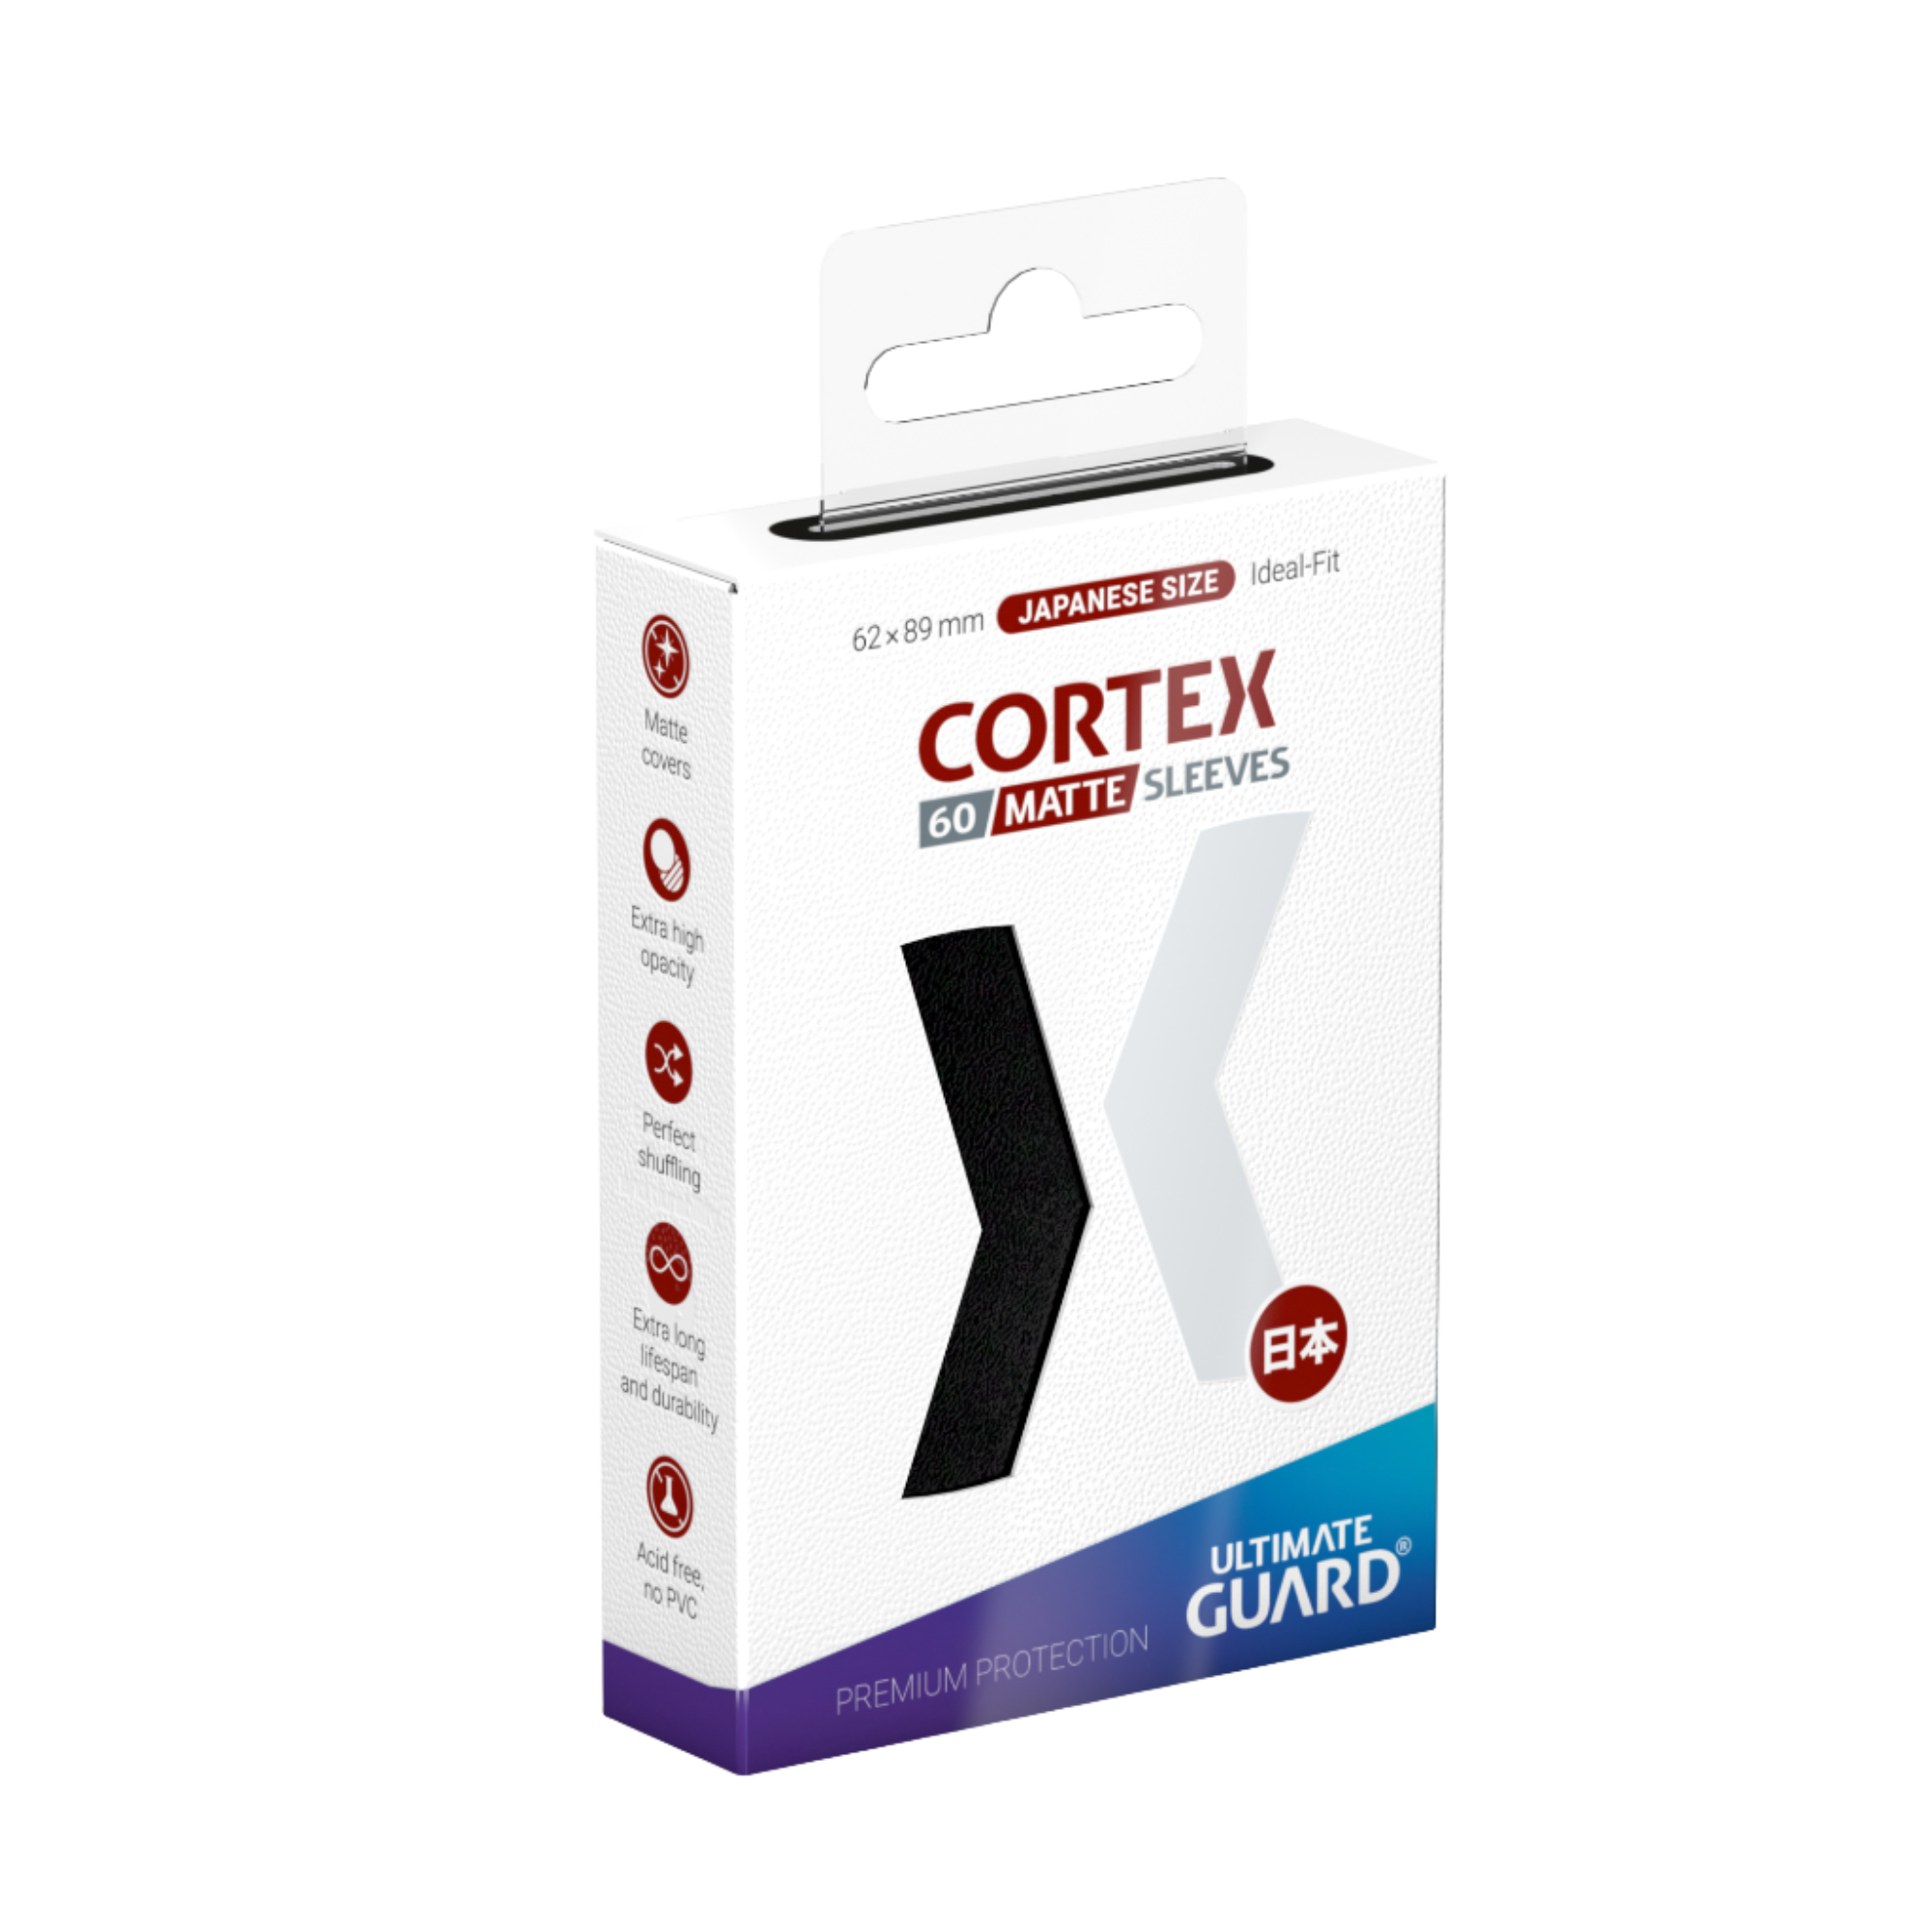 Ultimate Guard - Cortex Sleeves - Japanese Size - Ideal-Fit - Matte Black - 60pk